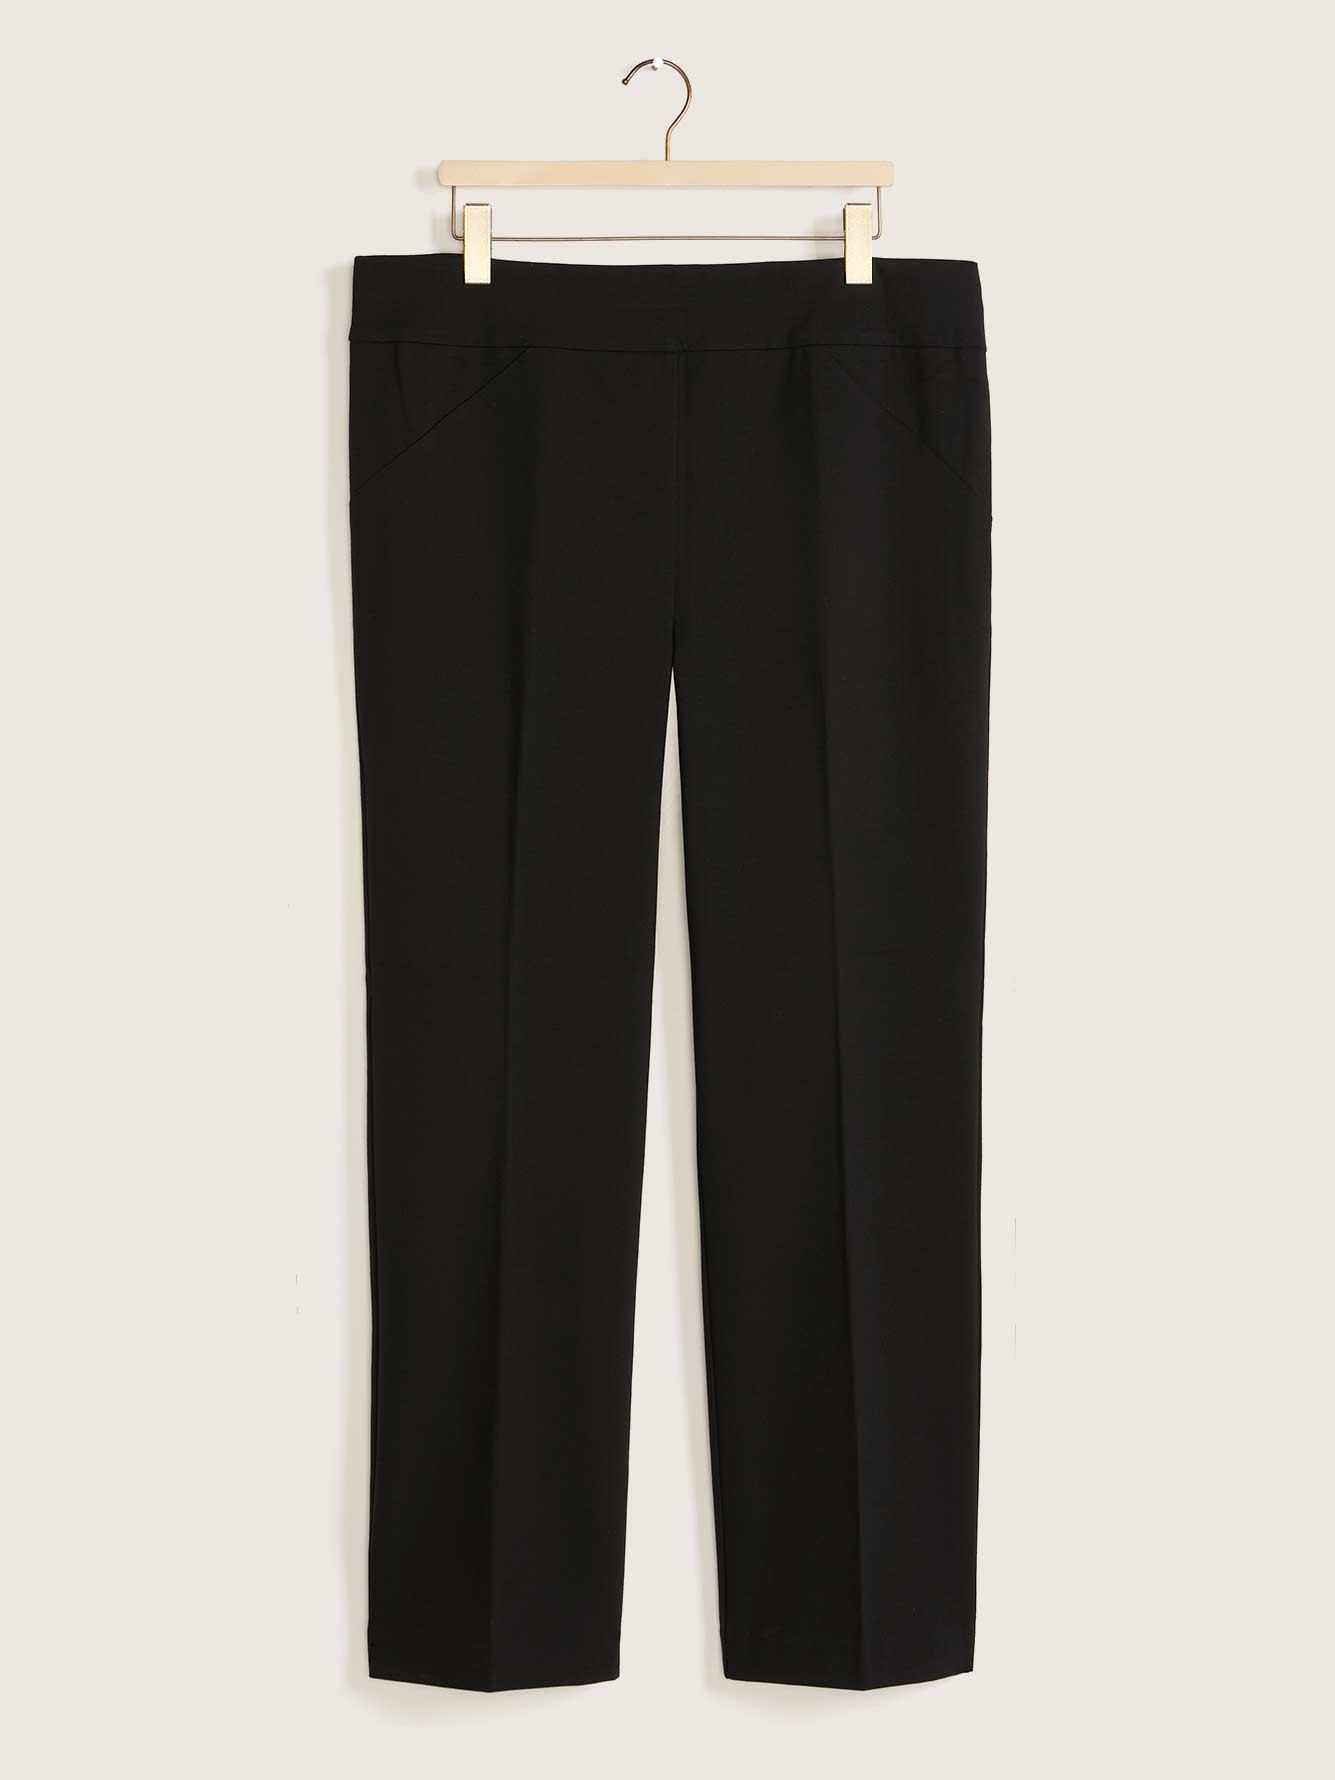 Petite, PDR Straight Leg Pant - In Every Story